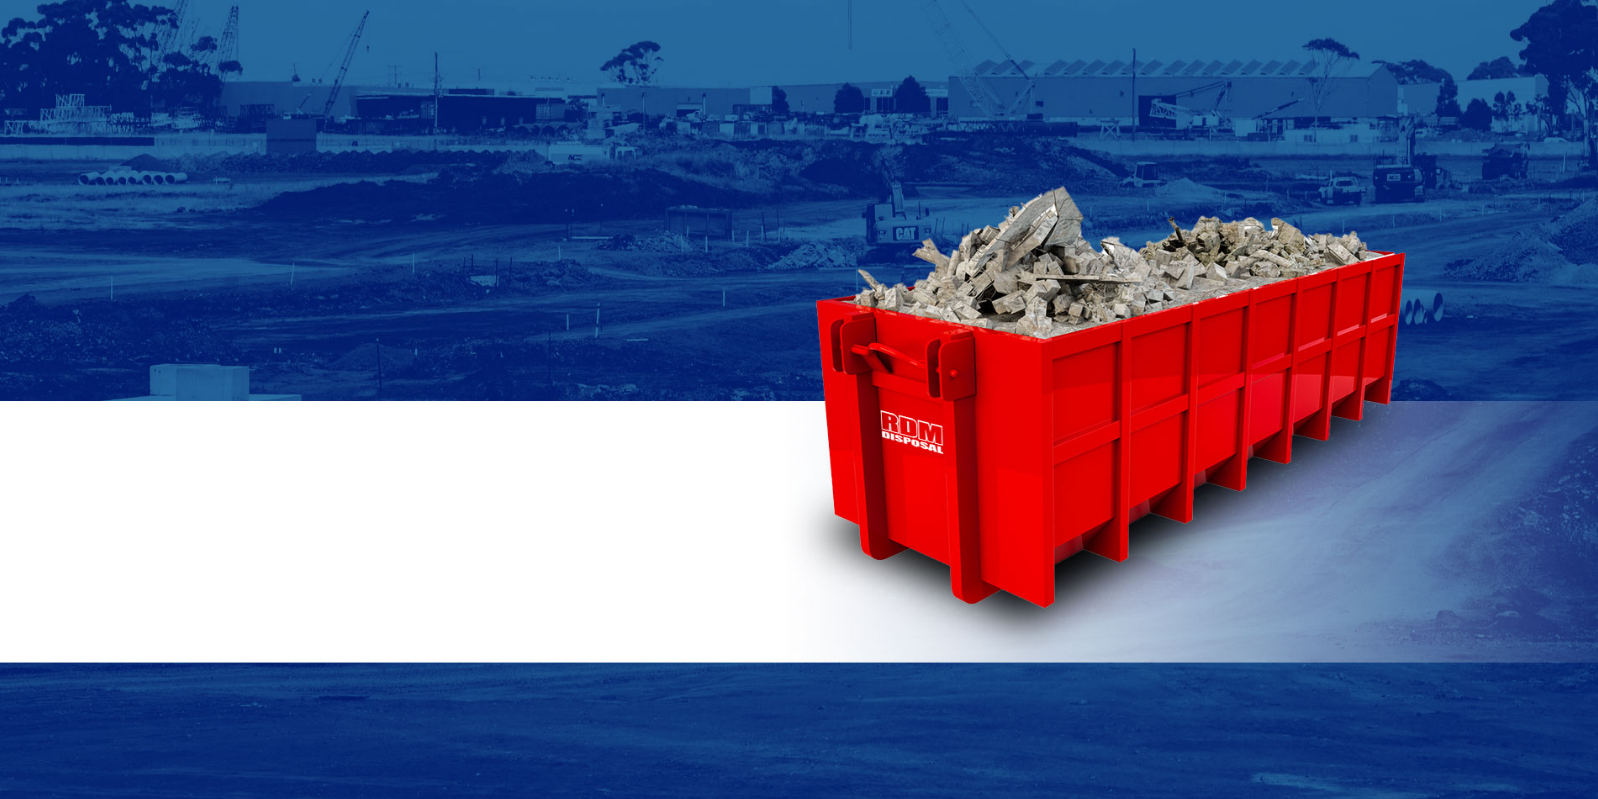 RDM Disposal for Your Dumpster Rentals in Mississauga, Brampton and the GTA